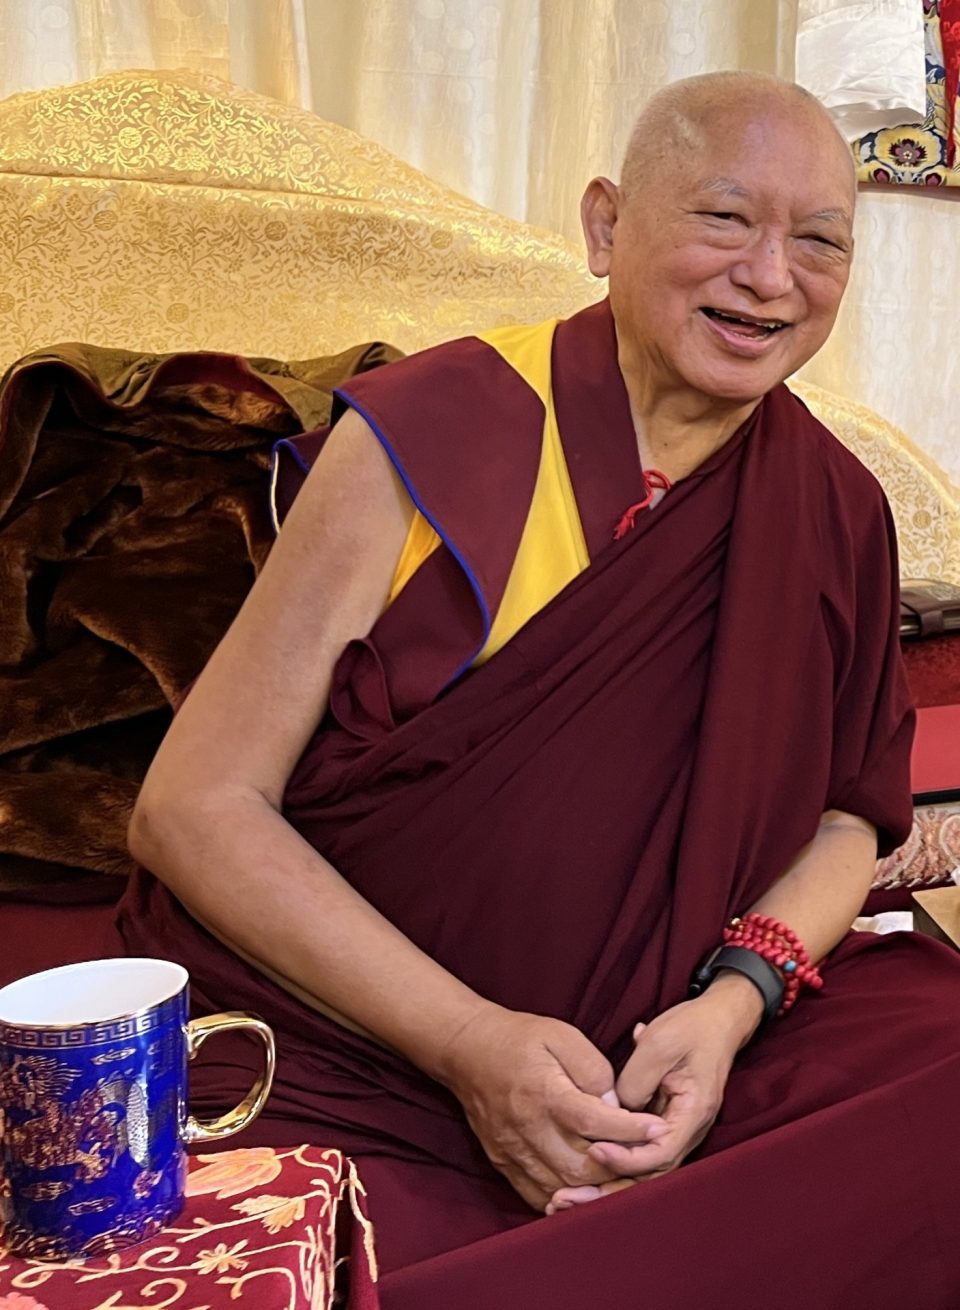 A Most Happy Birthday and Long Life to Lama Zopa Rinpoche!